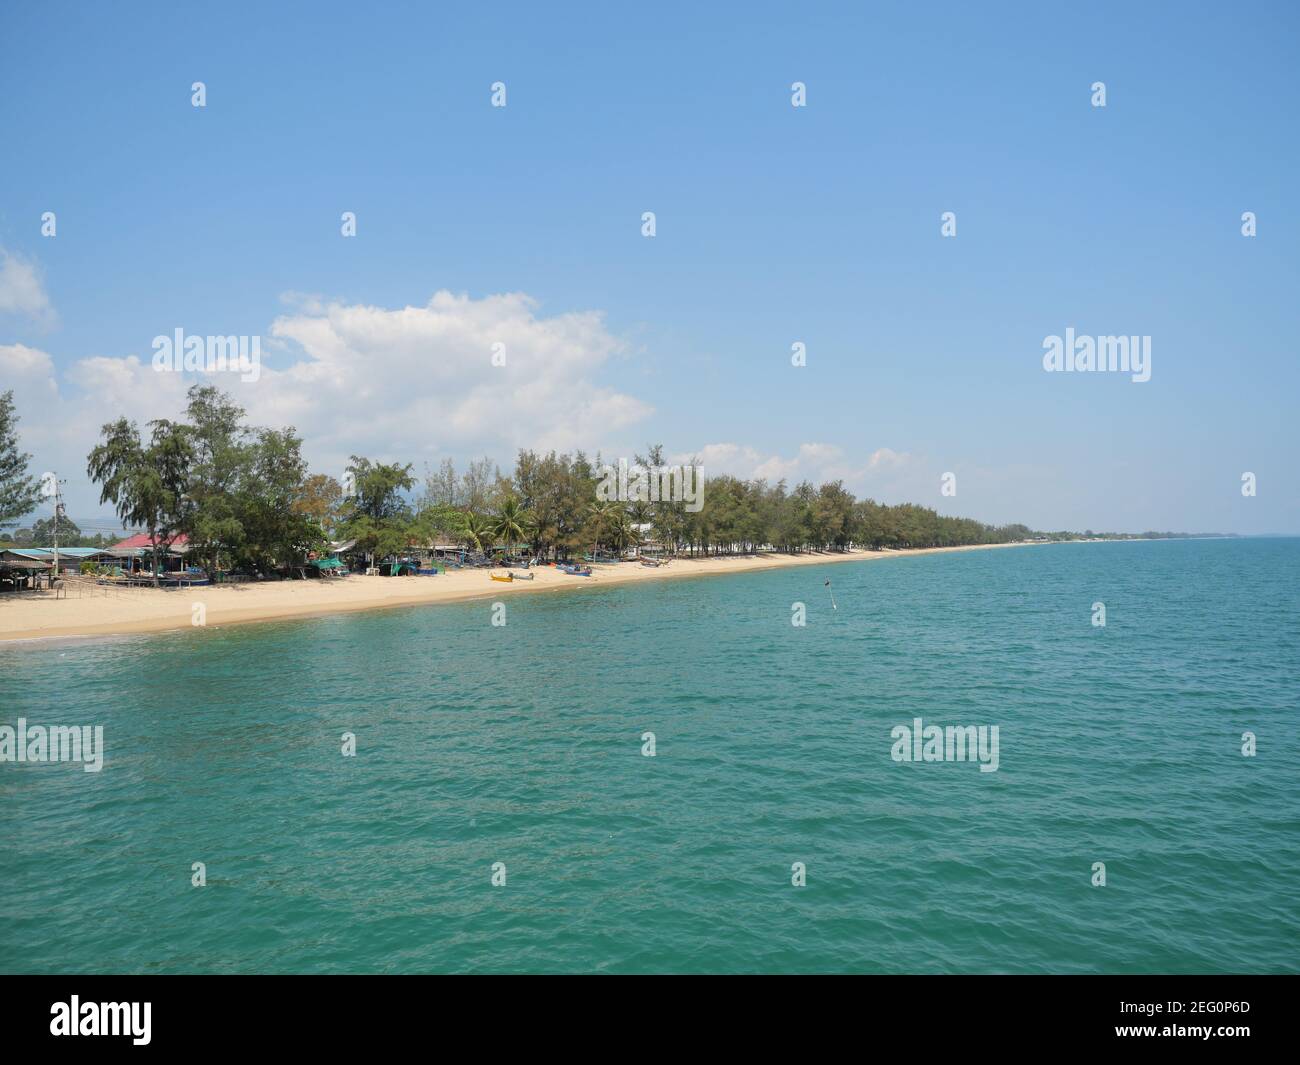 Green water in the sea with a fishing village on the brown sand beach with blue sky and white cloud in background, Prachuap Khiri Khan, Thailand Stock Photo